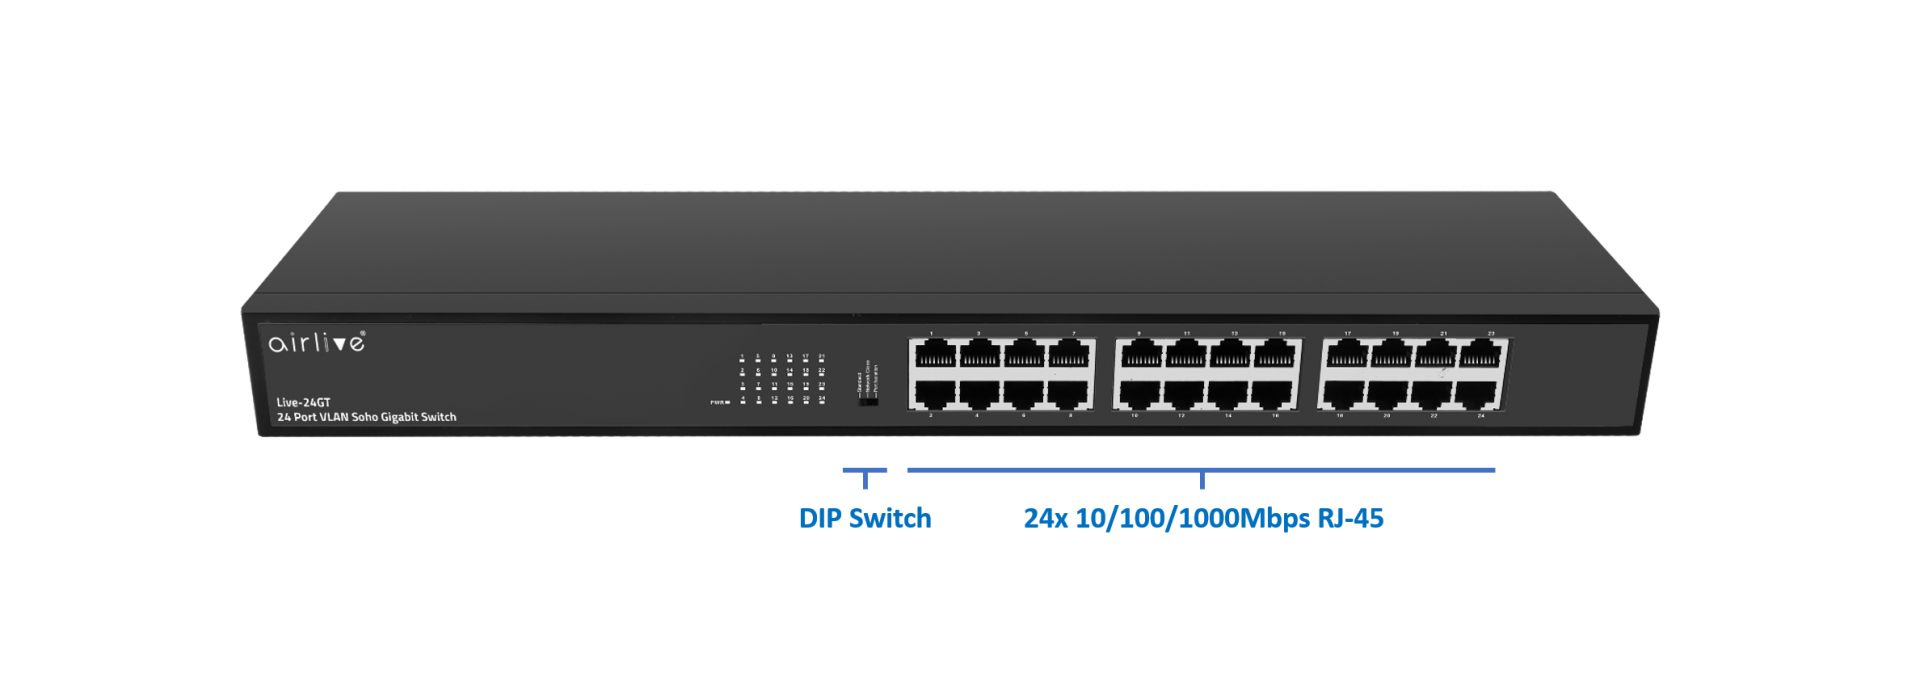 More than just a Plug-and-Play 24-Port Gigabit Switch VLAN and Flow Control are also supported.